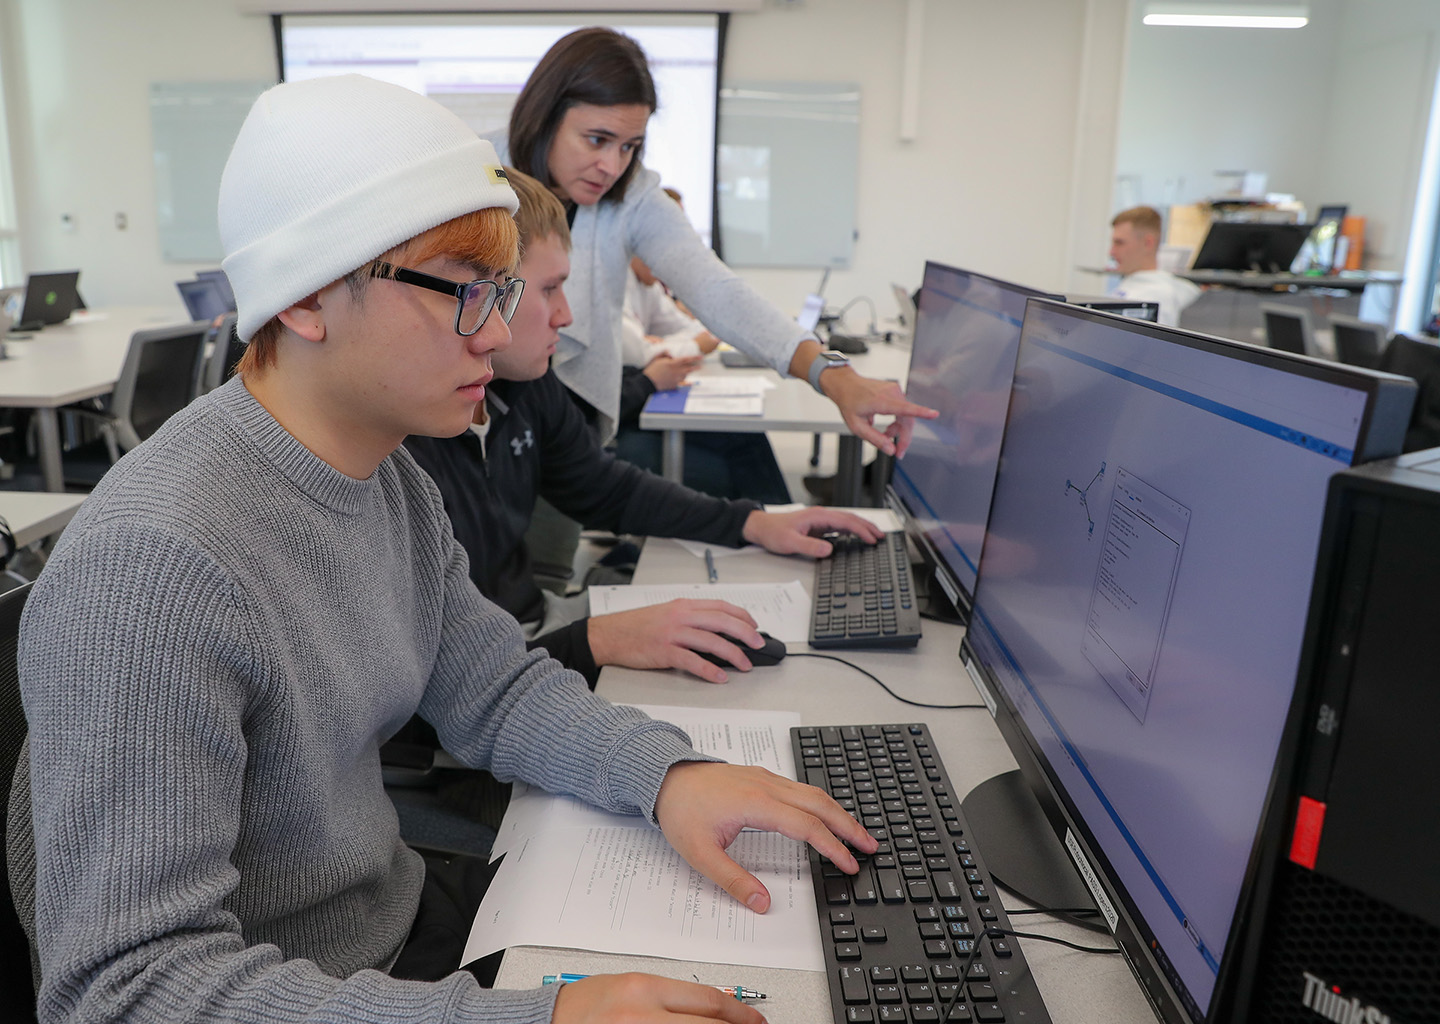 The Nebraska Career Scholarship program provides financial support for incoming UNK students planning careers in high-demand fields such as computer science, cybersecurity, engineering and health care. (Photo by Erika Pritchard, UNK Communications)